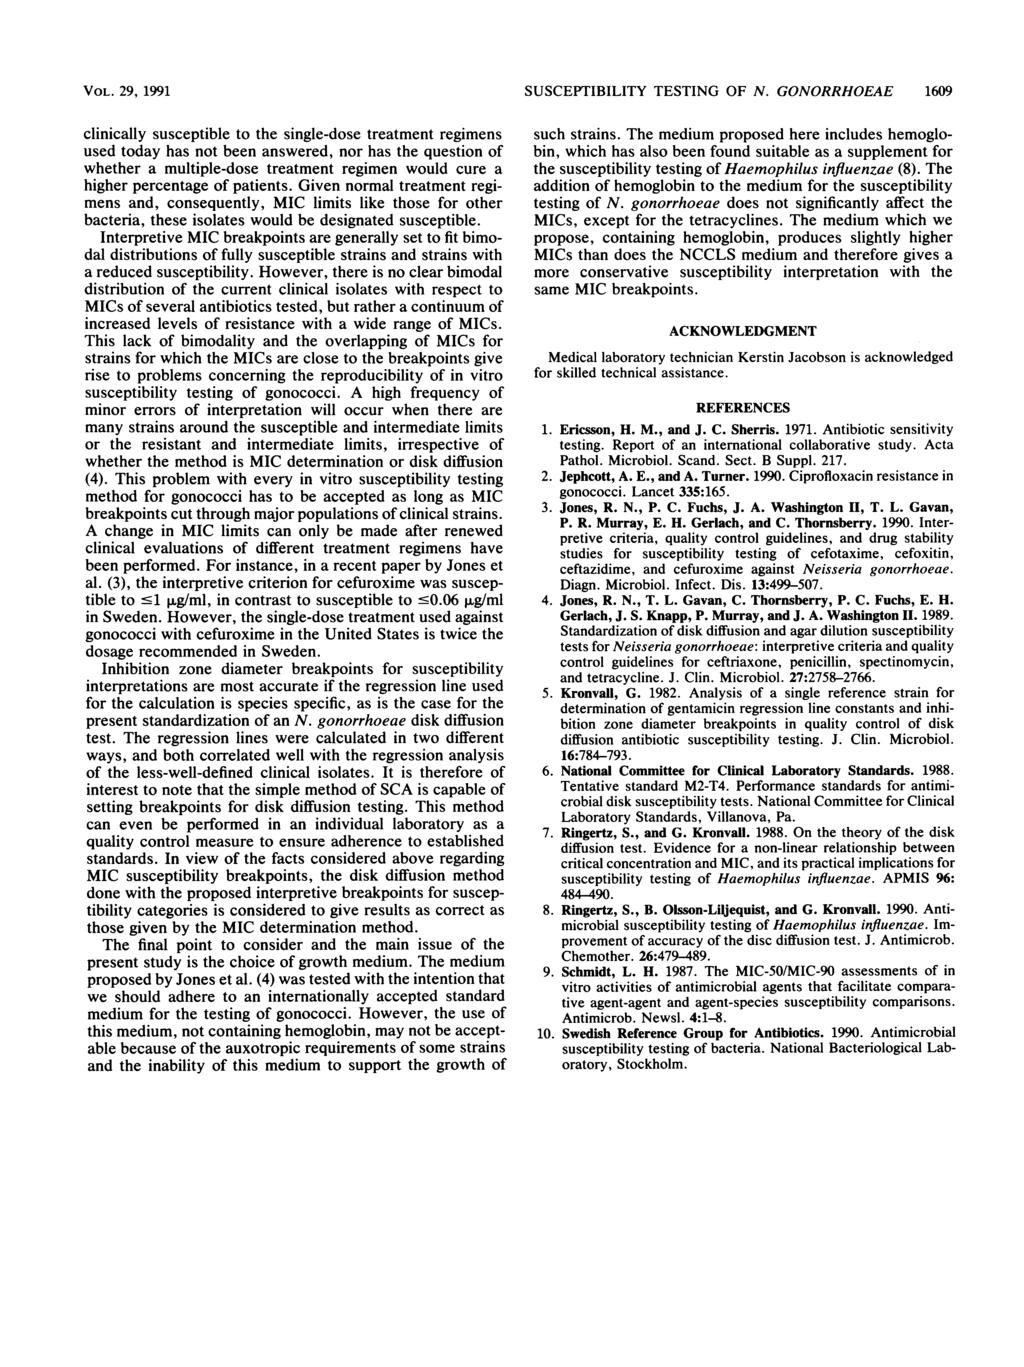 VOL. 29, 1991 clinically susceptible to the single-dose treatment regimens used today has not been answered, nor has the question of whether a multiple-dose treatment regimen would cure a higher